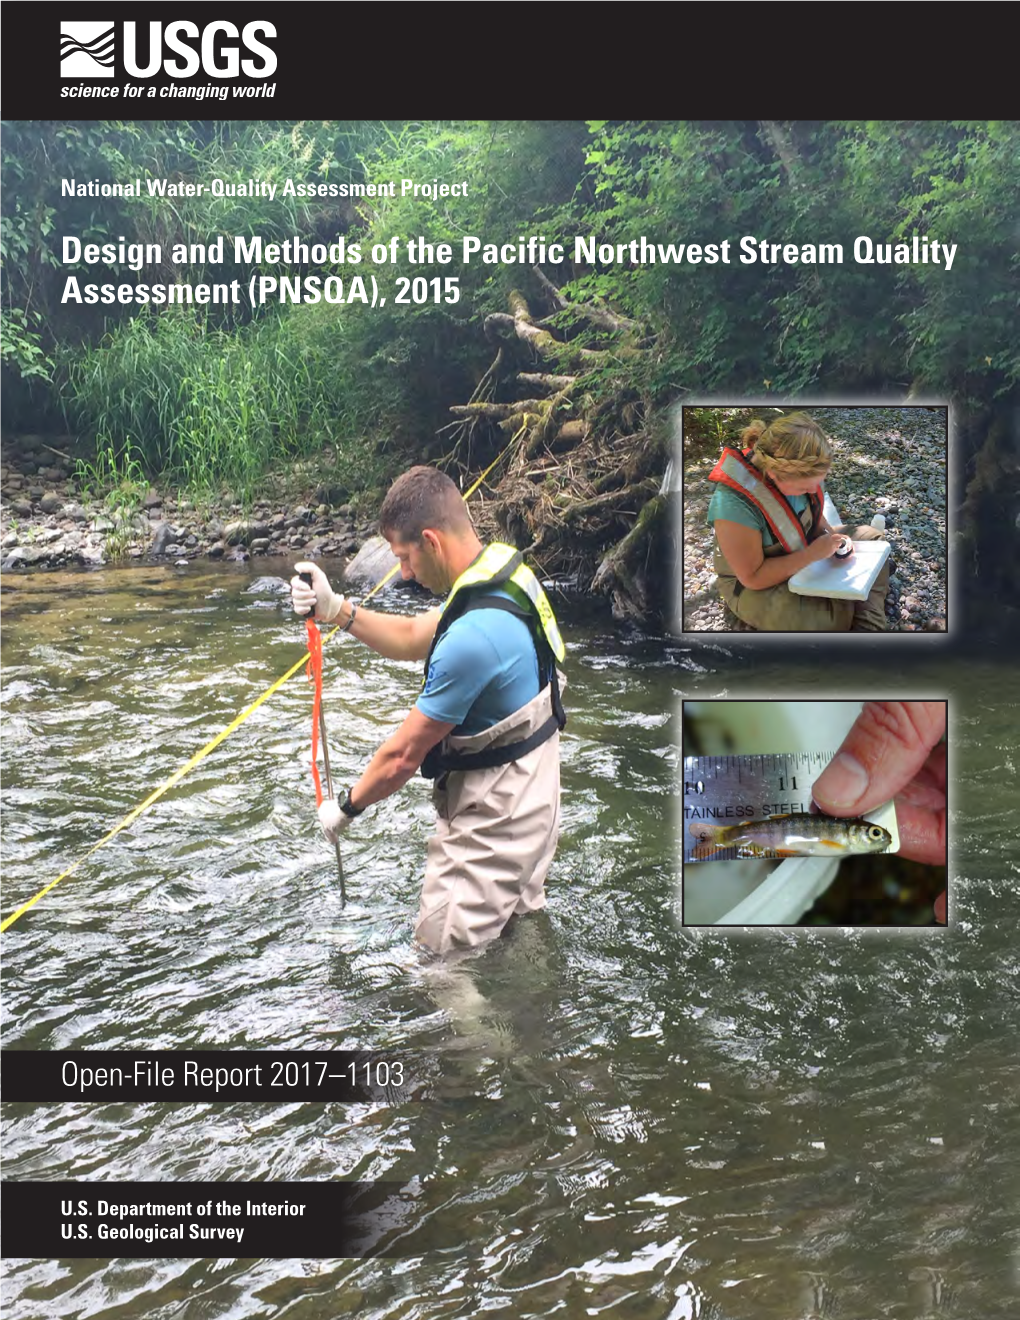 Design and Methods of the Pacific Northwest Stream Quality Assessment (PNSQA), 2015